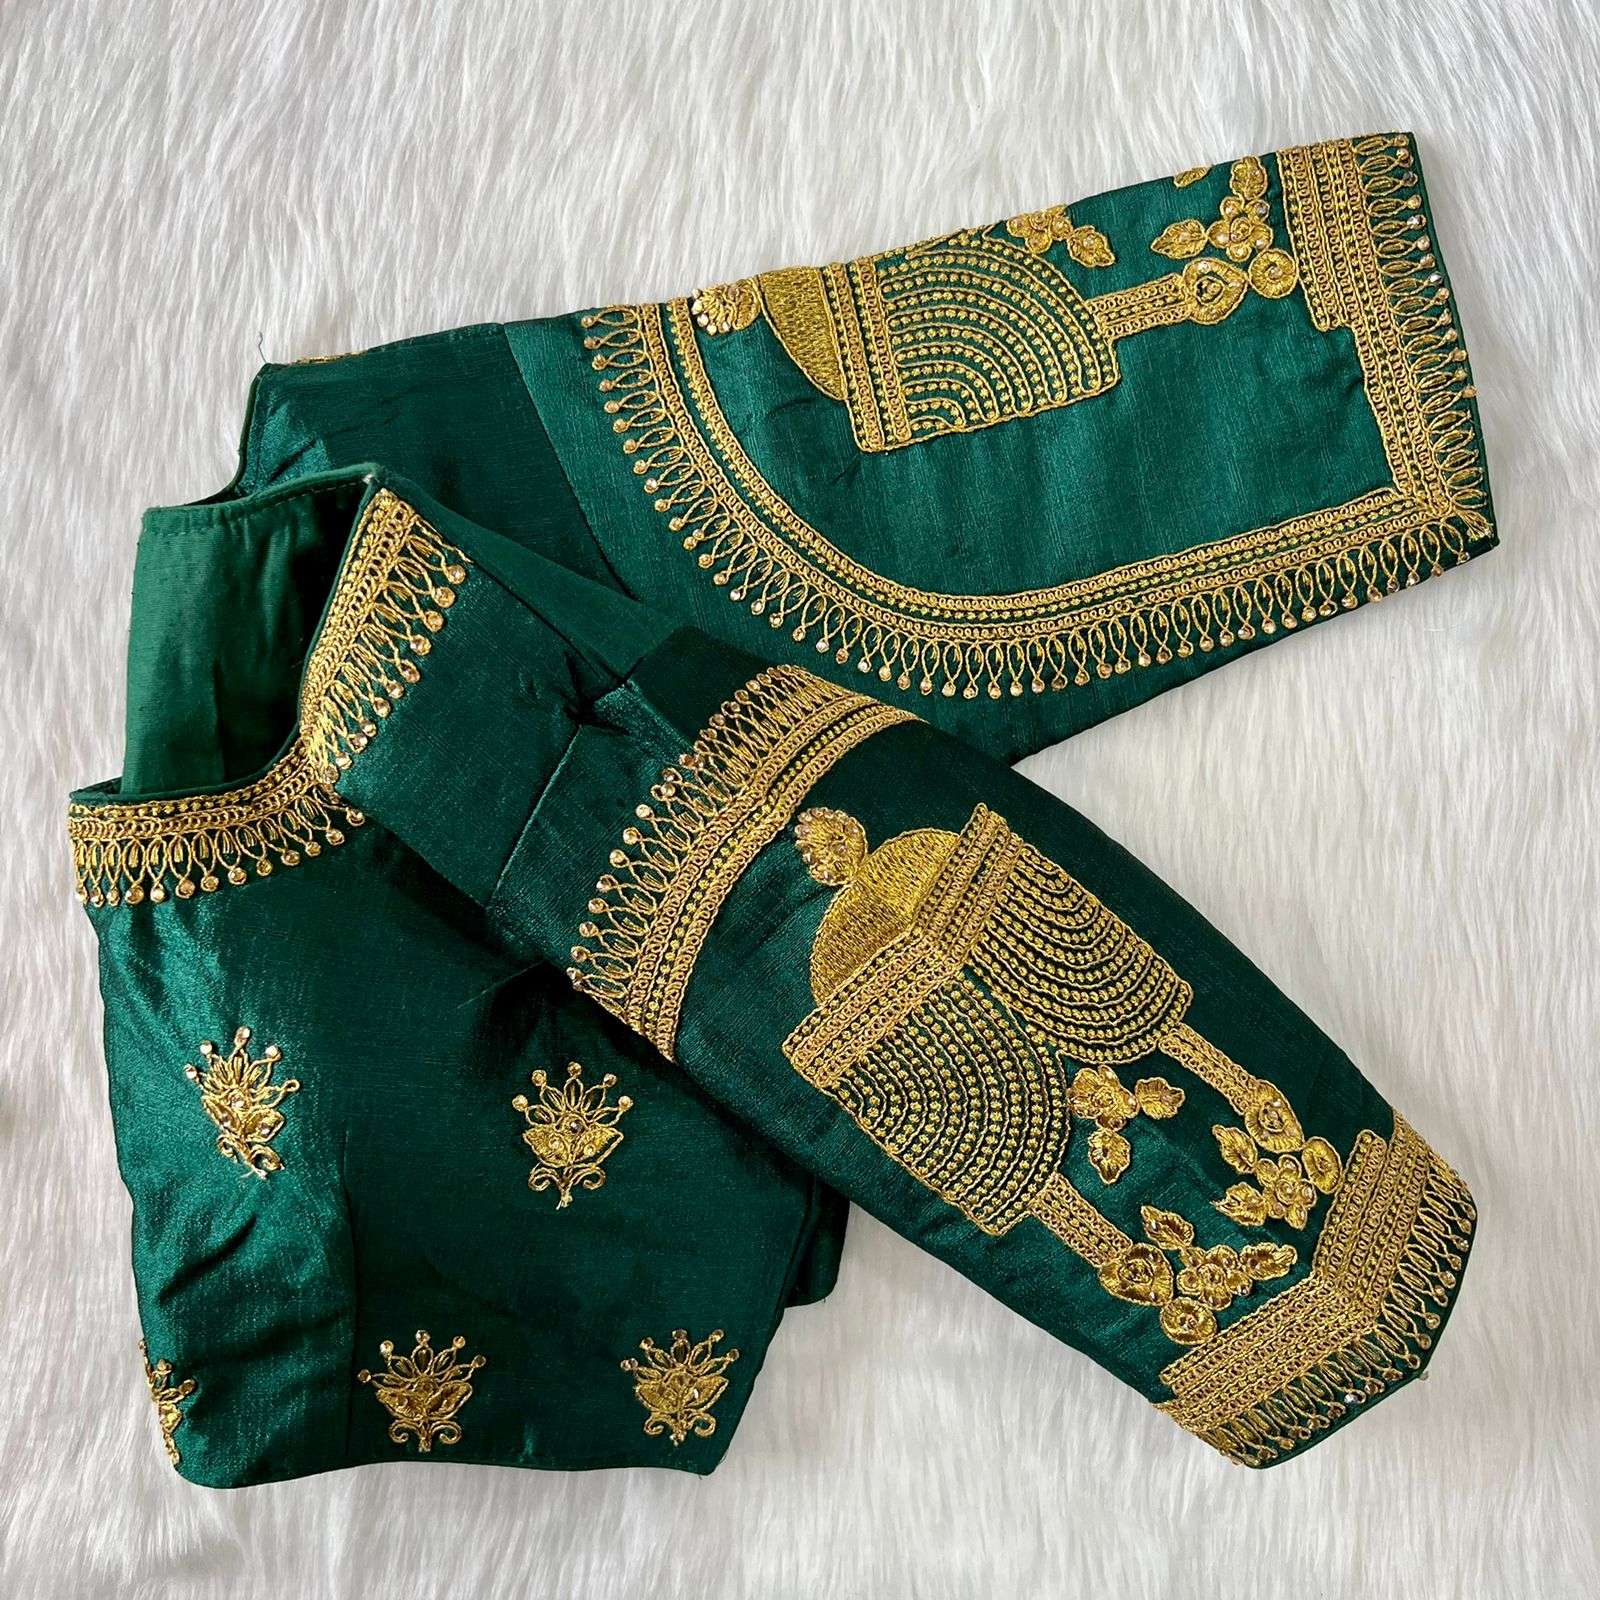  Wedding Bridal  temple blouse Buy Latest Blouse Designs collection 